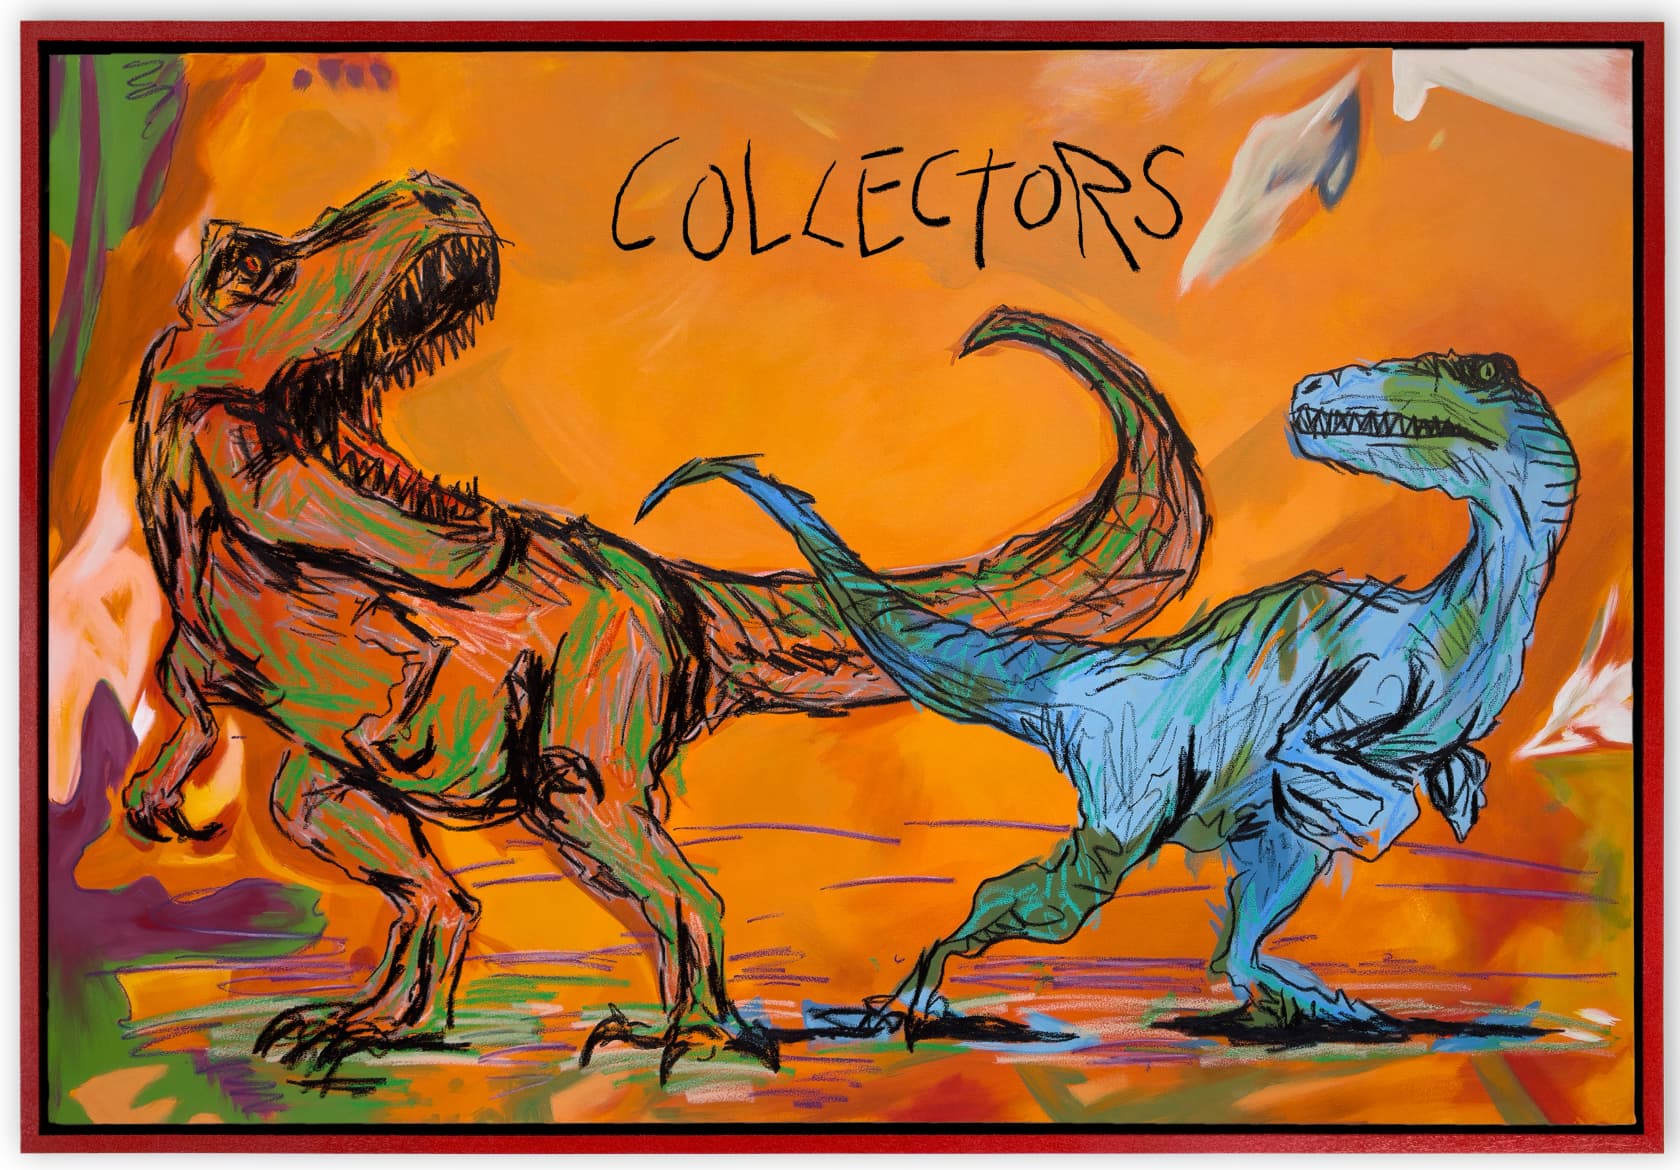 The Connor Brothers Collectors Acrylic and oil stick on canvas